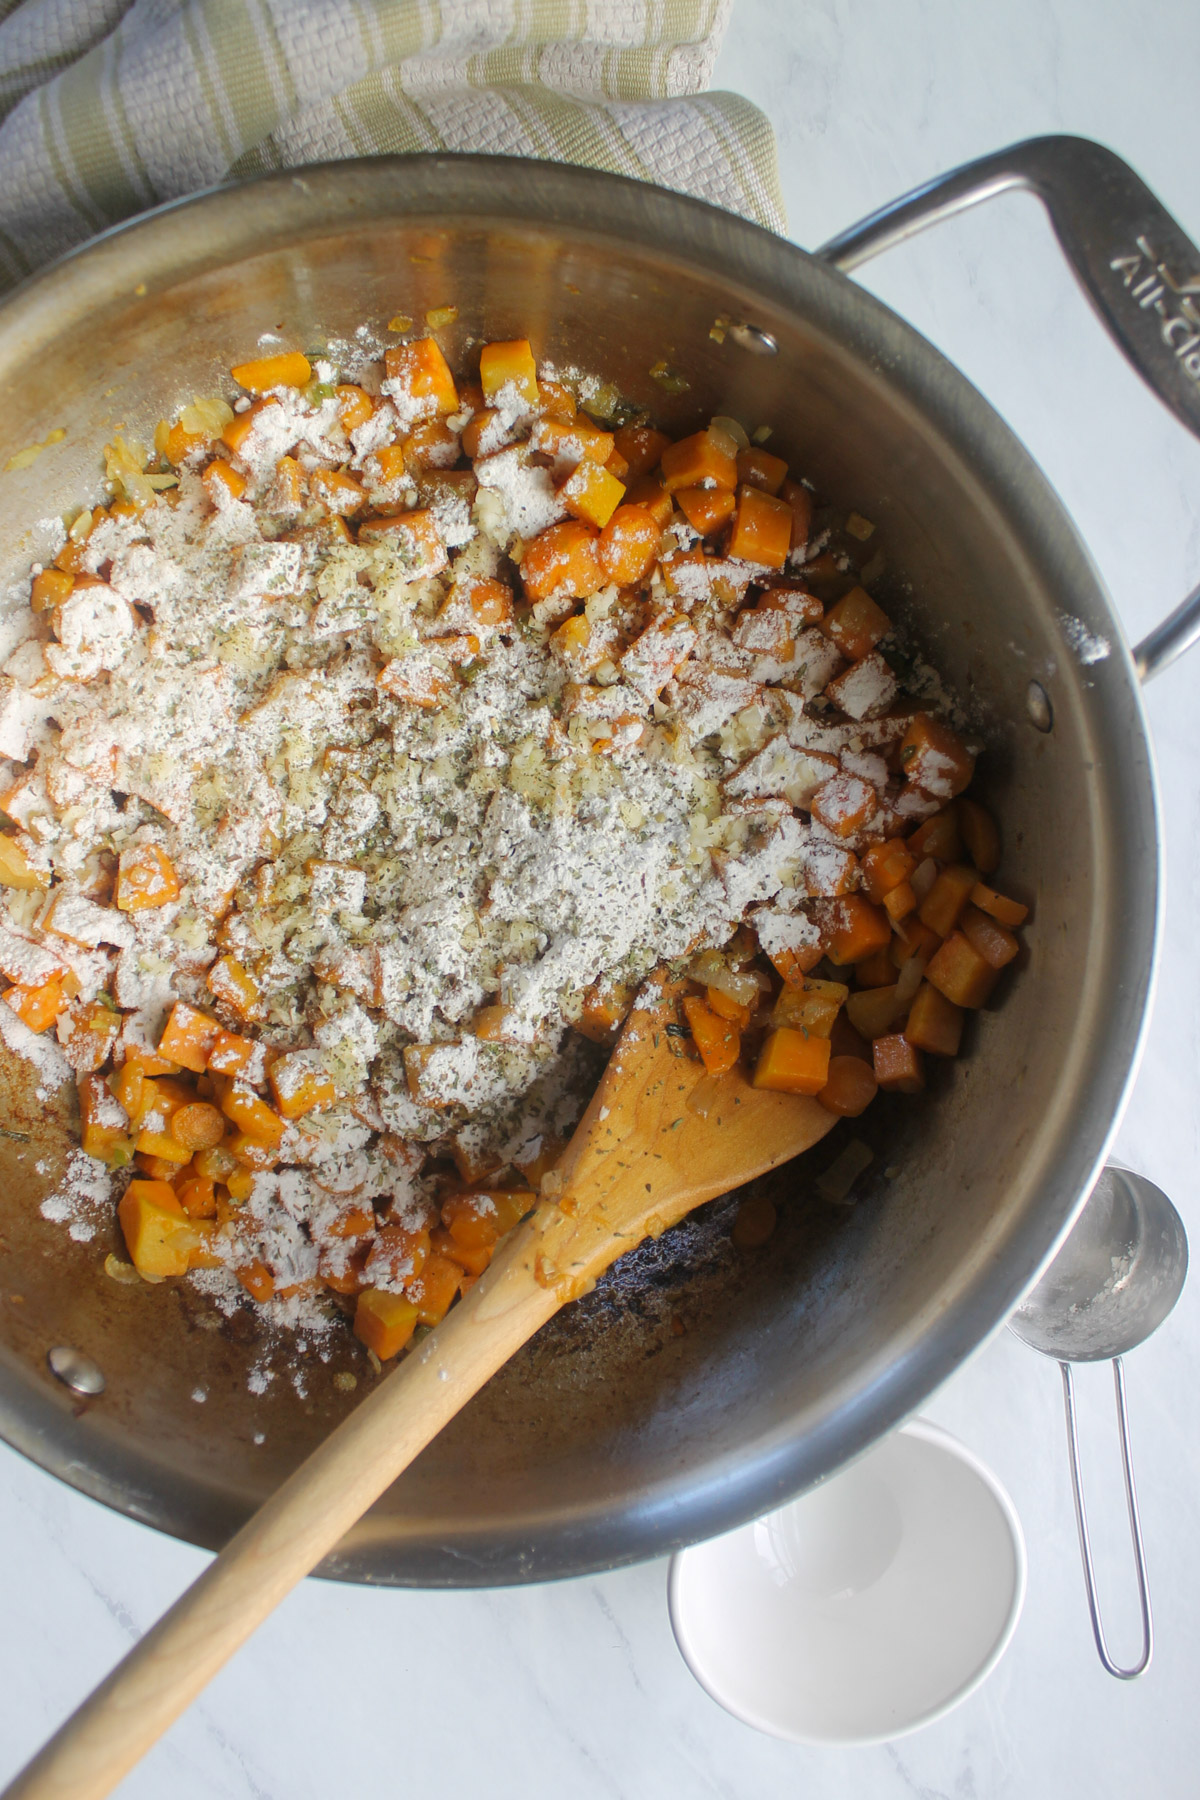 Adding flour, garlic and seasoning to vegetables in a skillet.